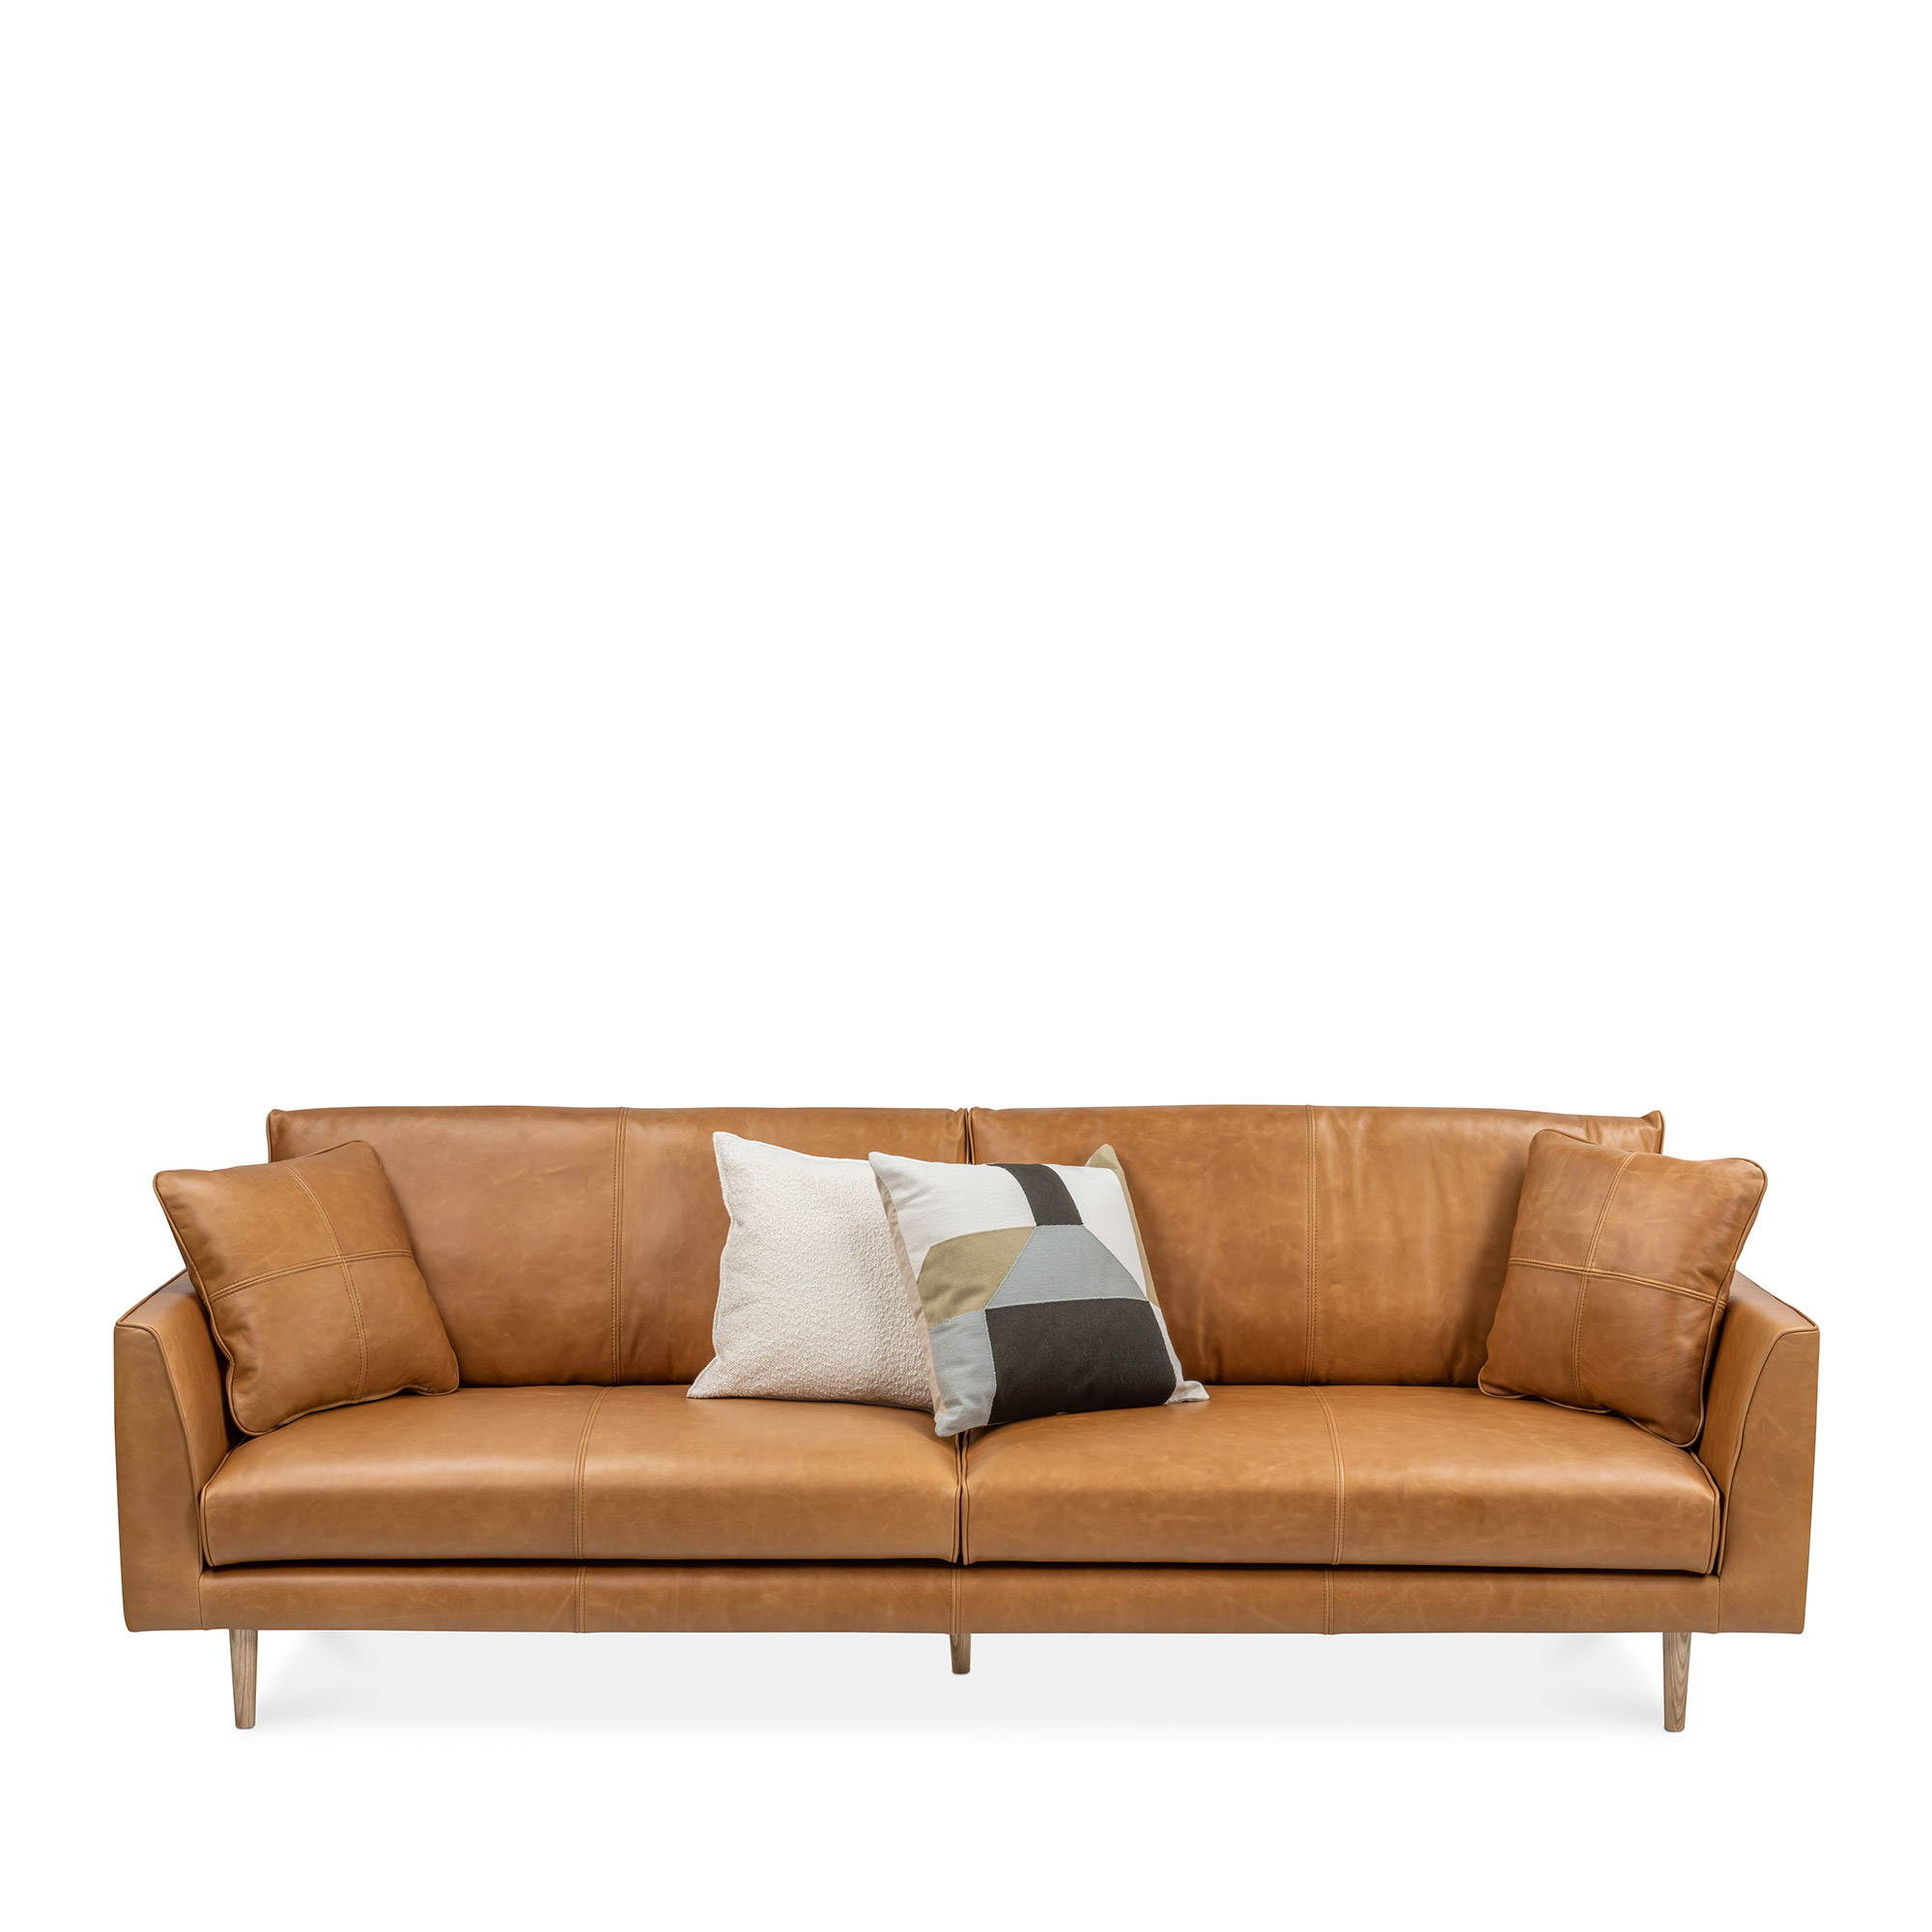 Narvik Range Fabric Sofas and Couches